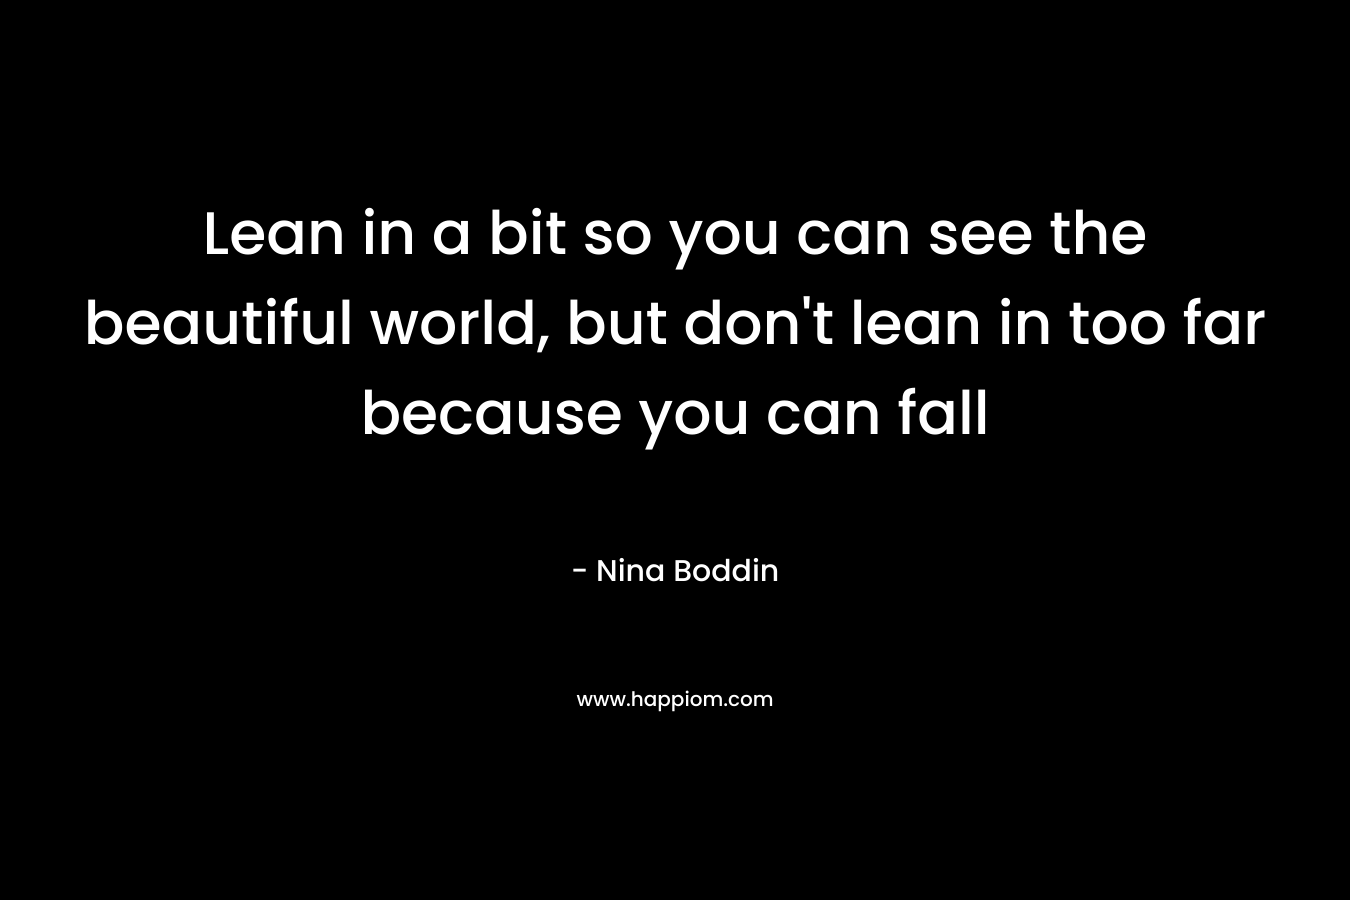 Lean in a bit so you can see the beautiful world, but don’t lean in too far because you can fall – Nina Boddin